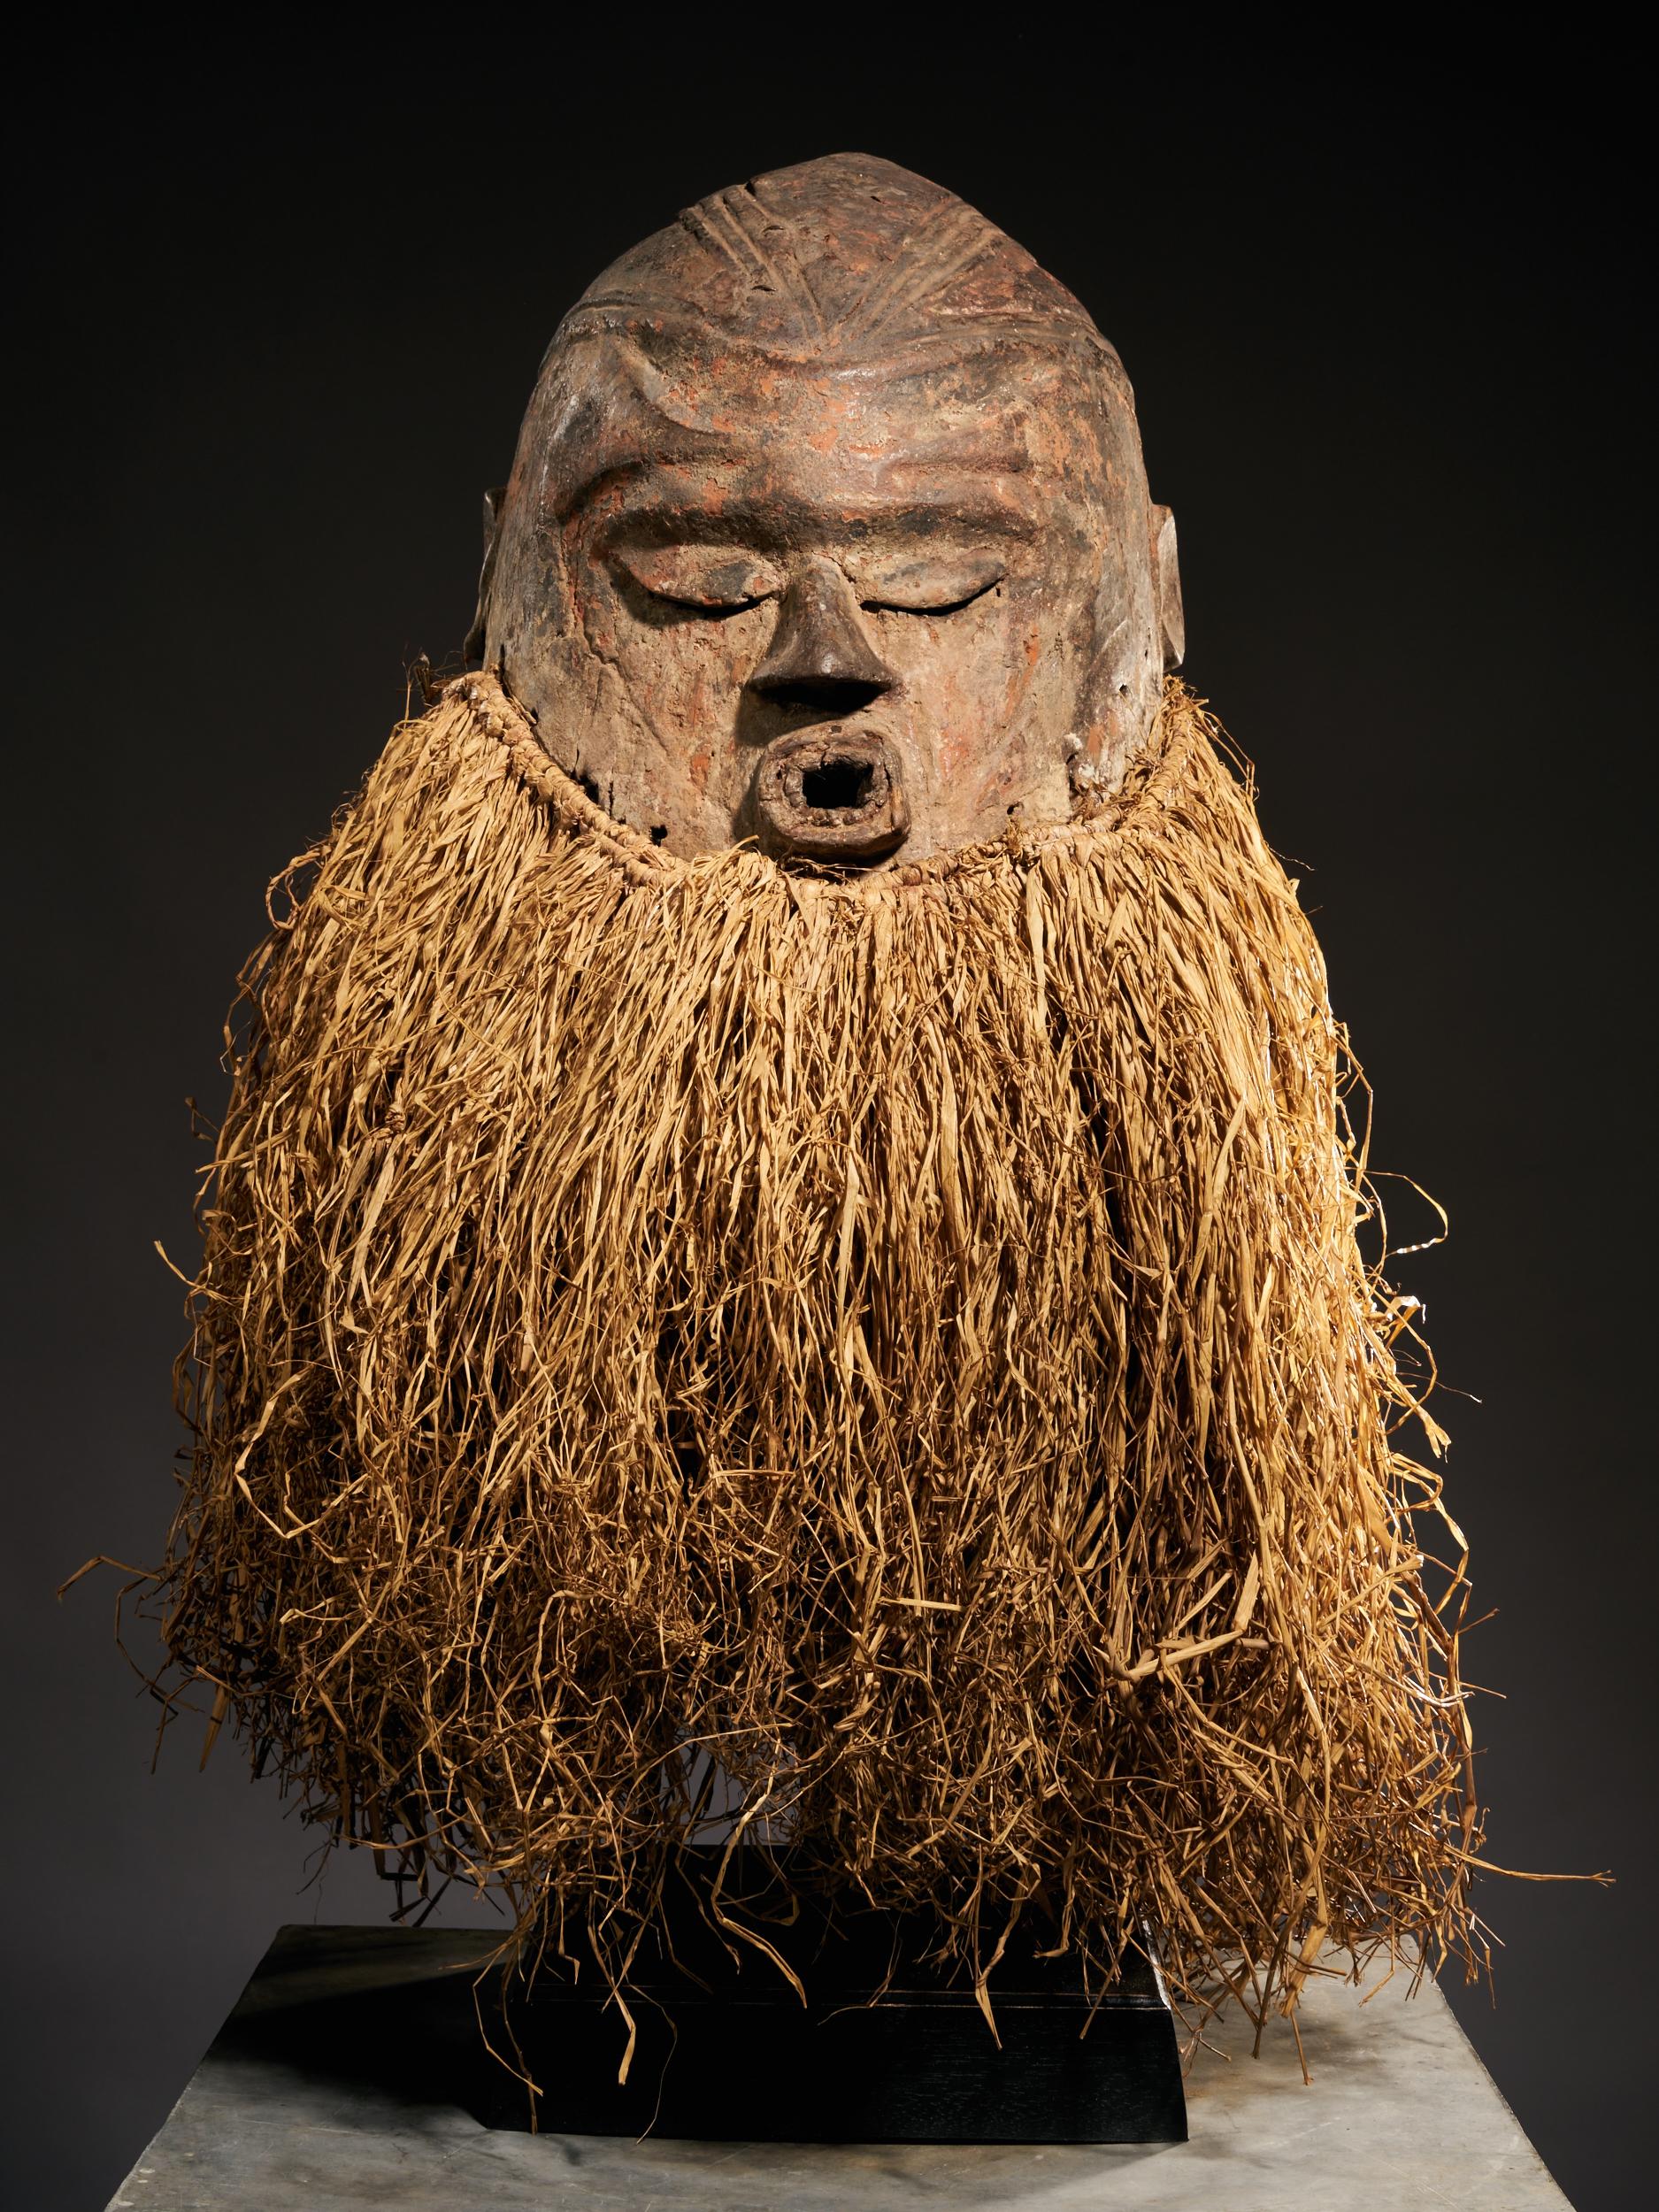 This Suku helmet mask has quite a striking appearance. The closed eyes give the mask an introverted aura, while the lips are pursed, as if making a sound or singing. The top of the head is decorated with carvings and of course the most striking